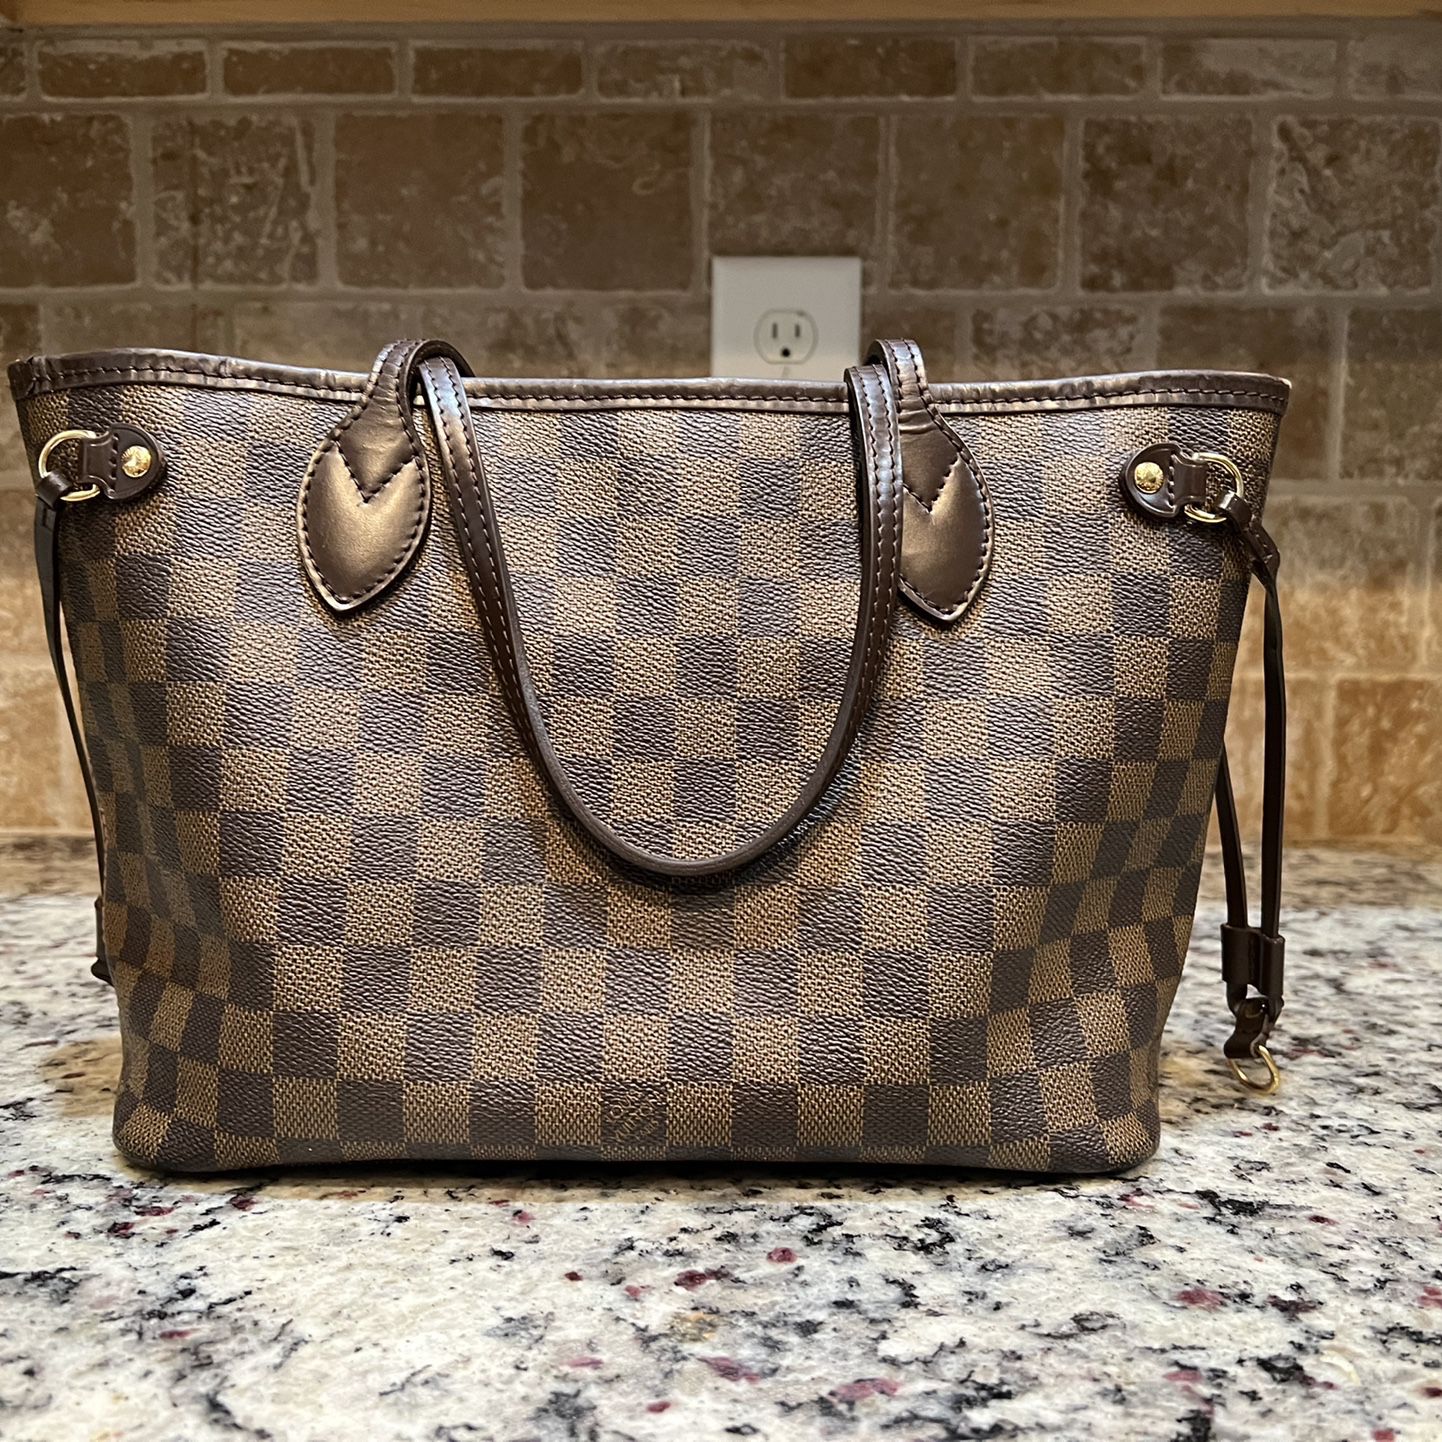 Authentic Louis Vuitton Neverfull GM for Sale in Minnetonka, MN - OfferUp